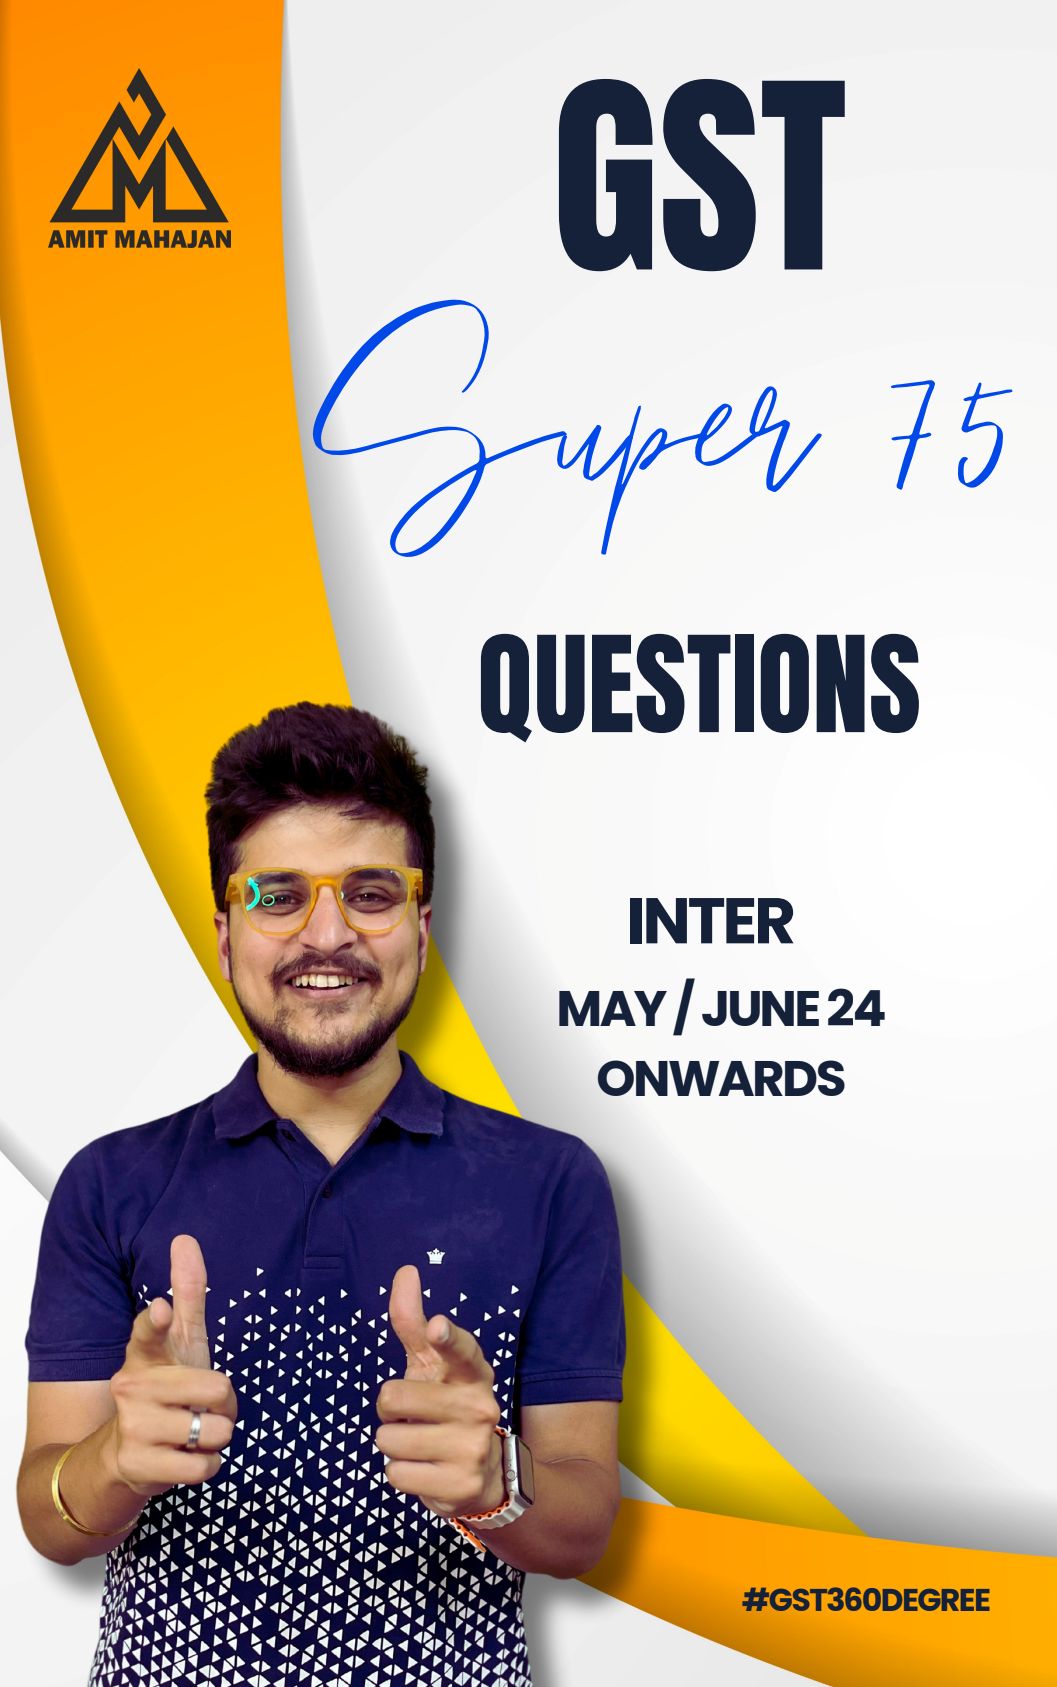 GST Super 75 Questions relevant for May-24 